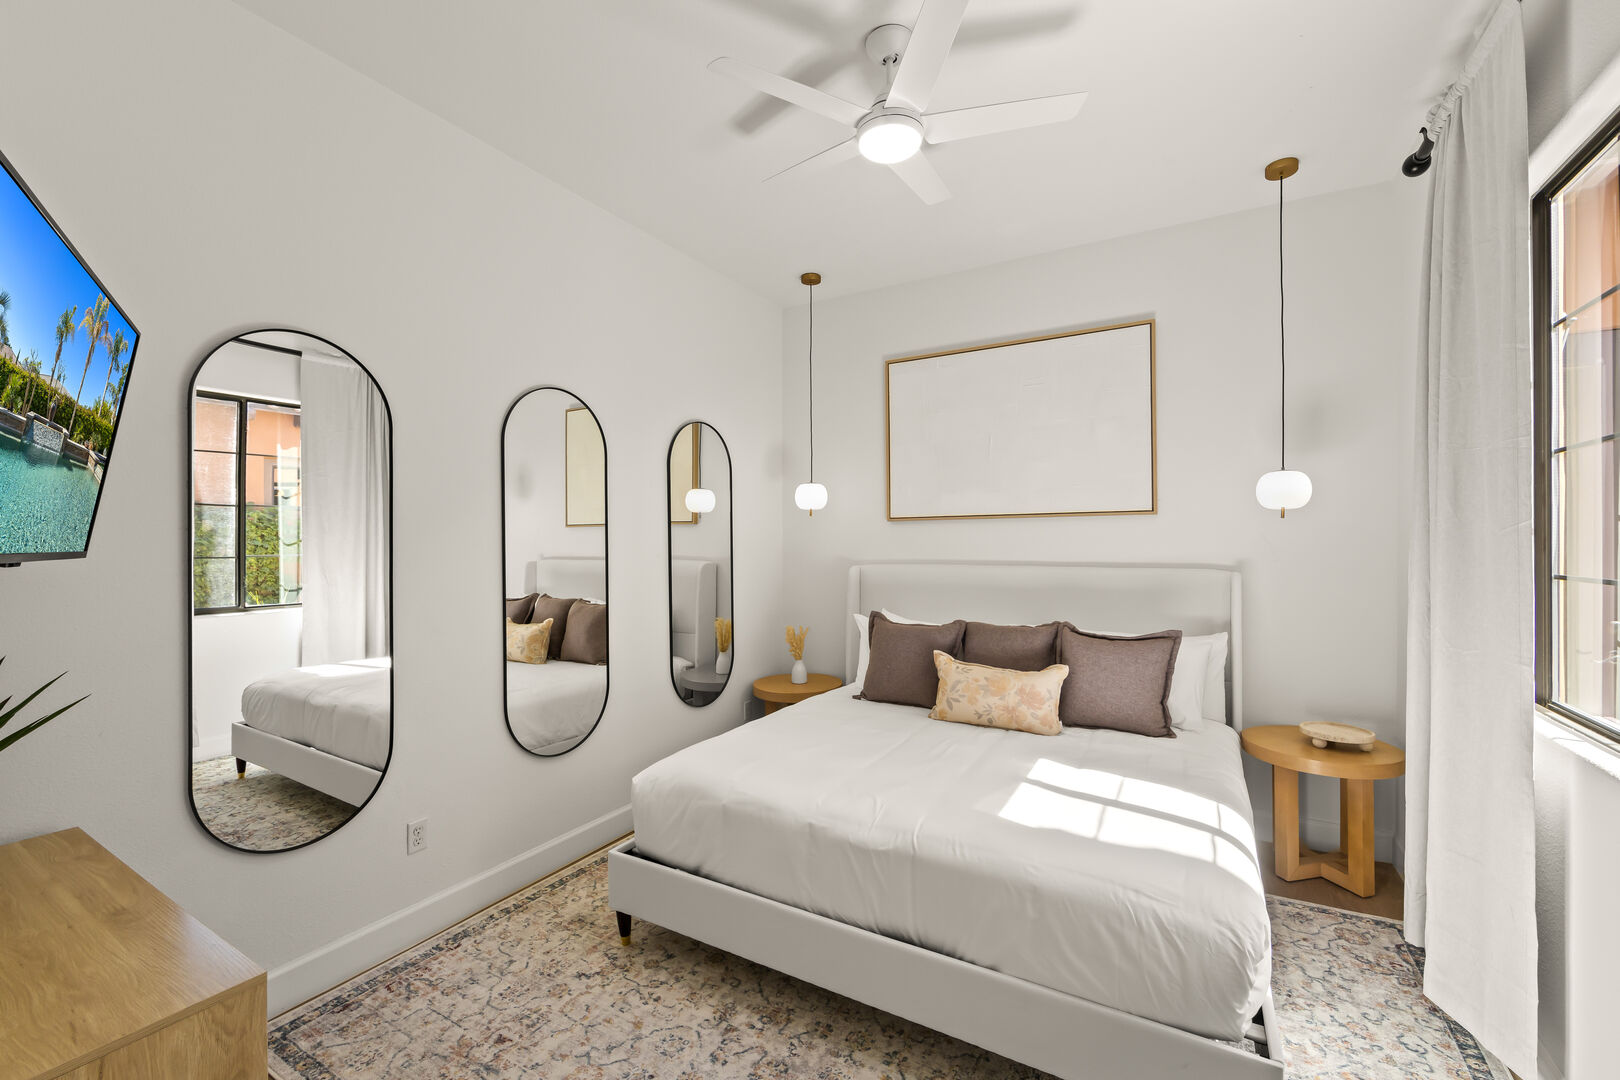 Bedroom 4 is located next to the front doors and features a King-sized Bed, 43-inch Insignia Smart television, remote-controlled ceiling fan, and decorative pendant lamps.